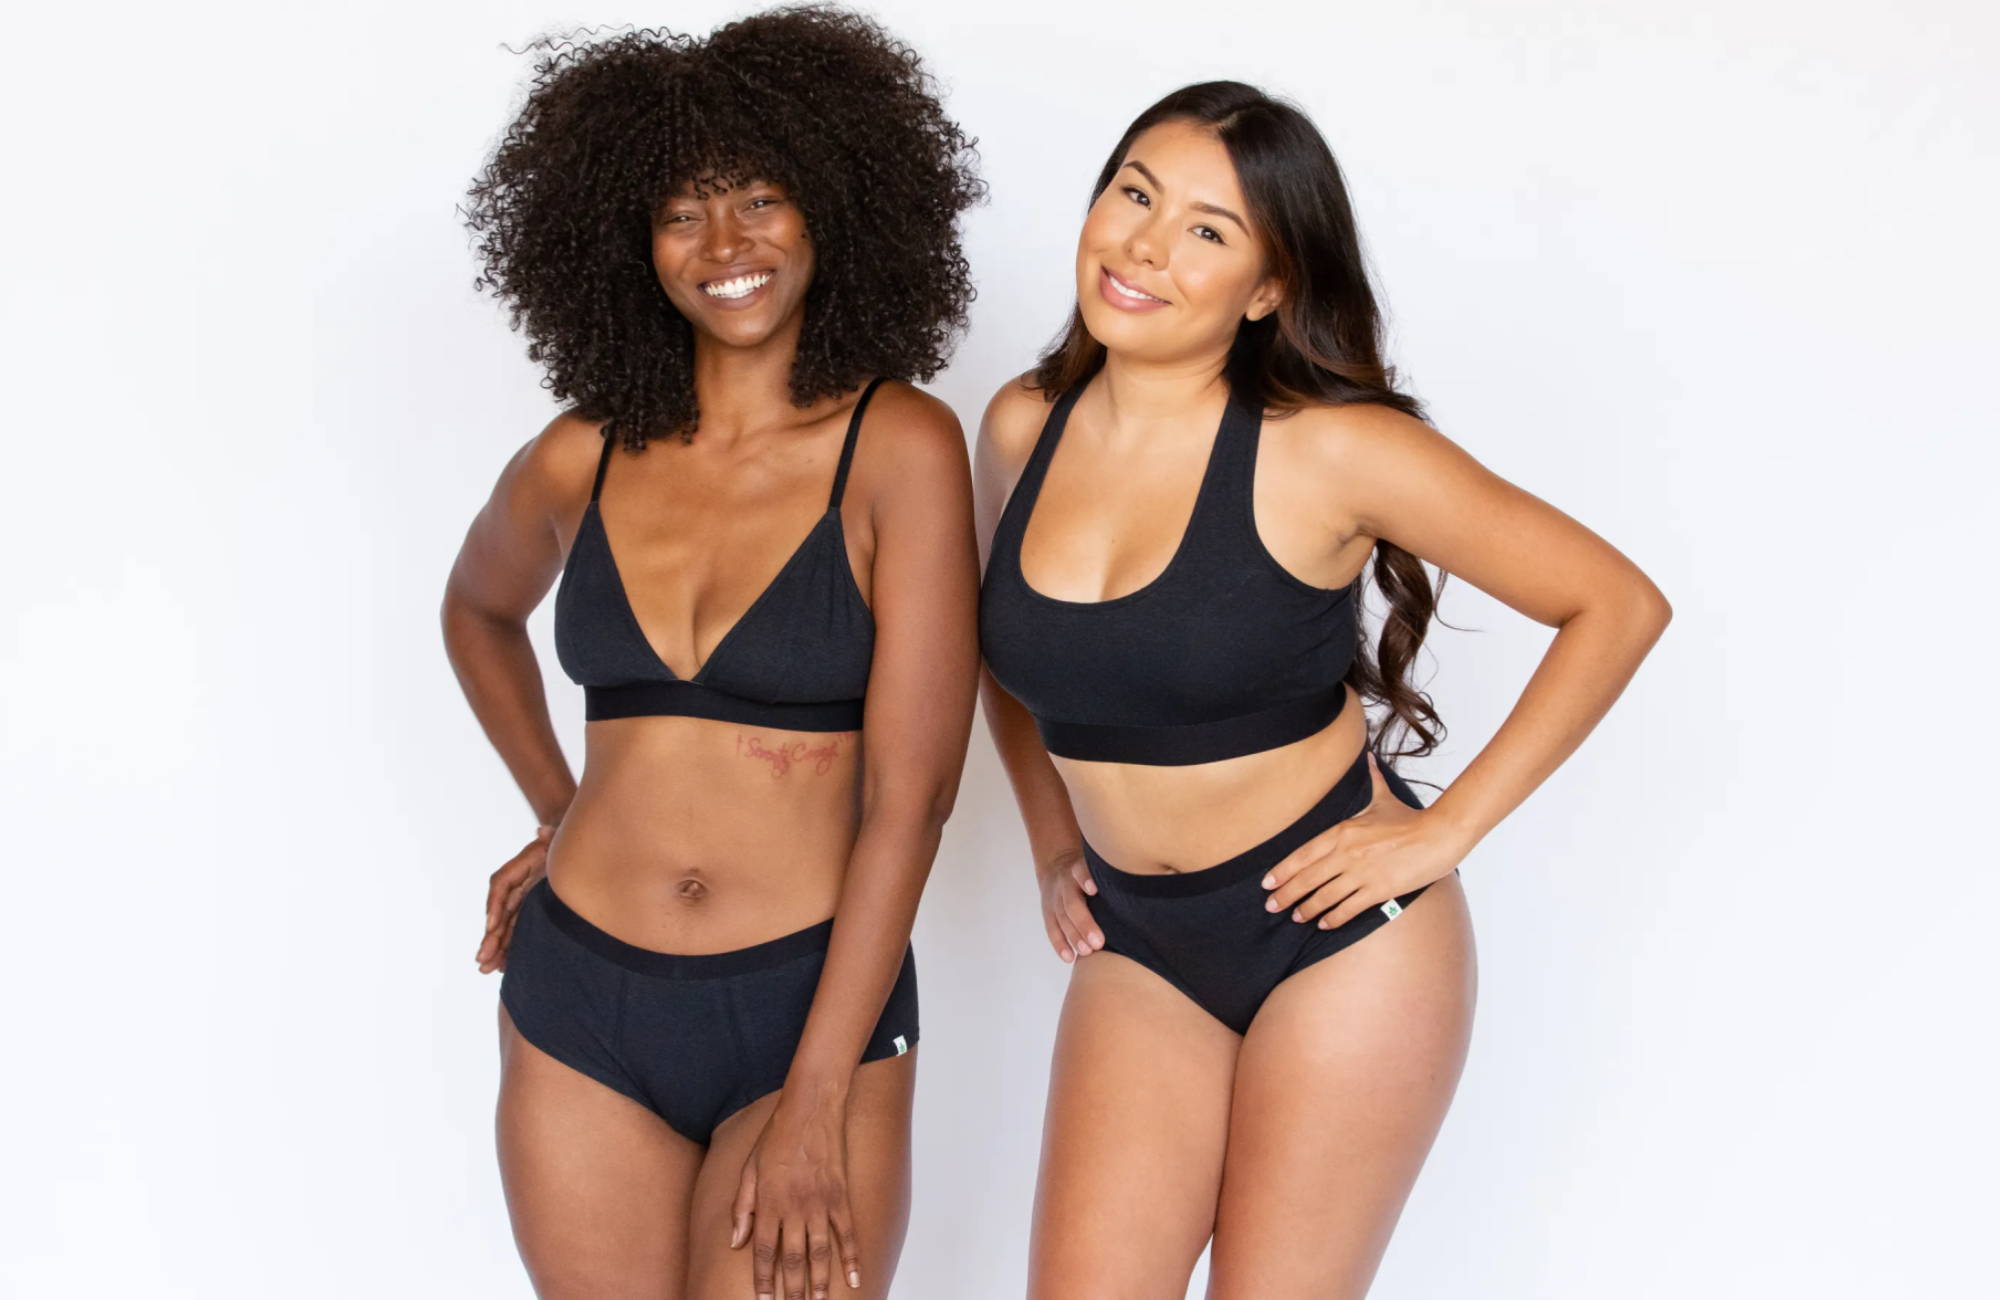 Will a bralette help prevent the sagging of breasts as much as